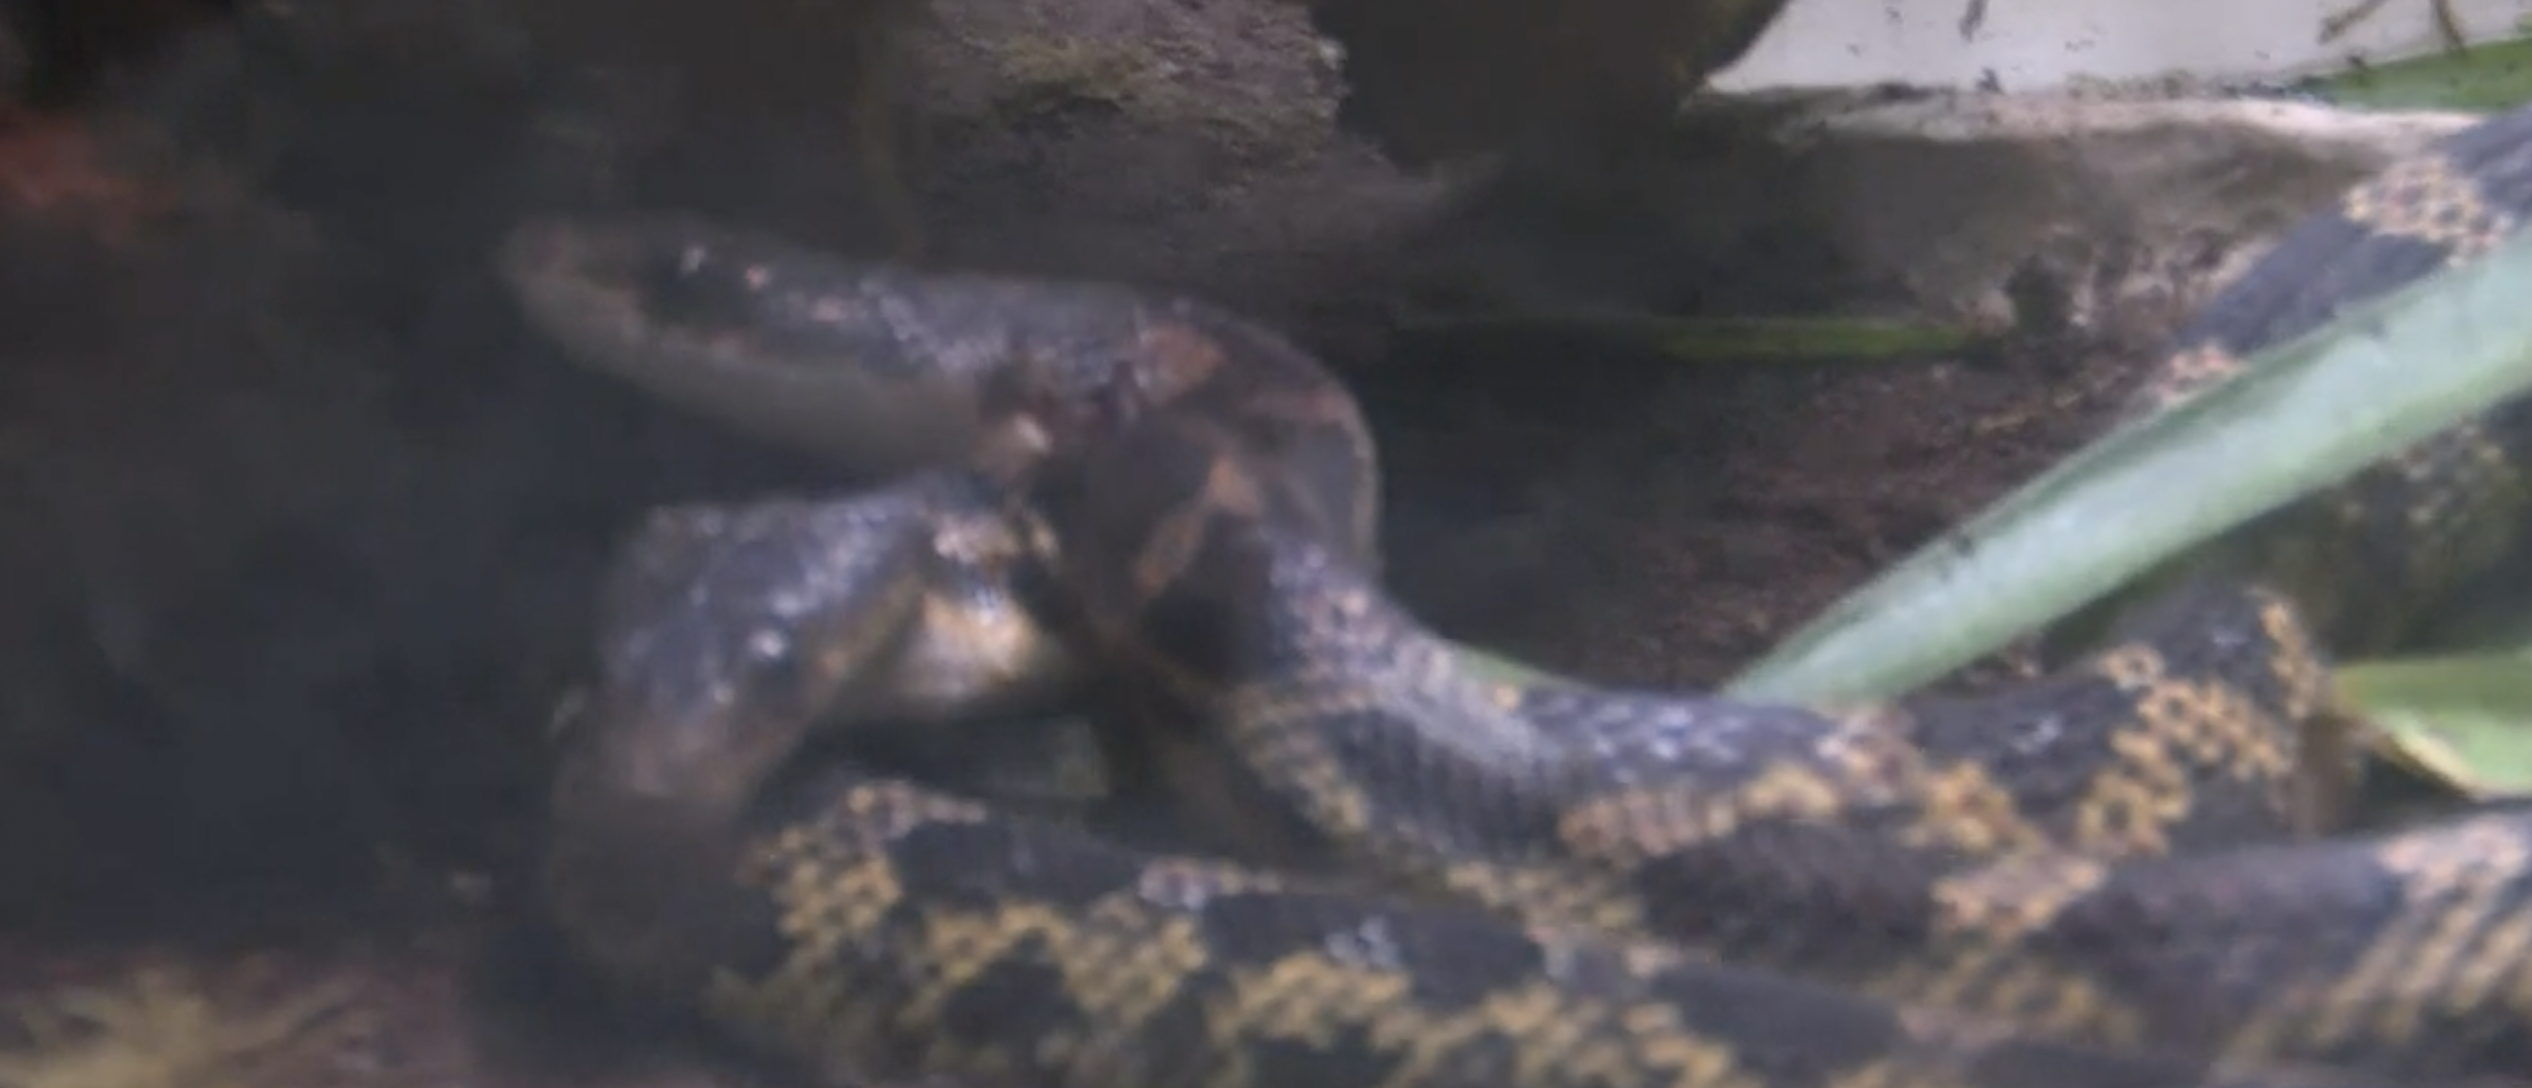 You can now visit a rare snake that has 2 heads, 2 brains and 1  uncoordinated body at a Texas zoo - CBS News